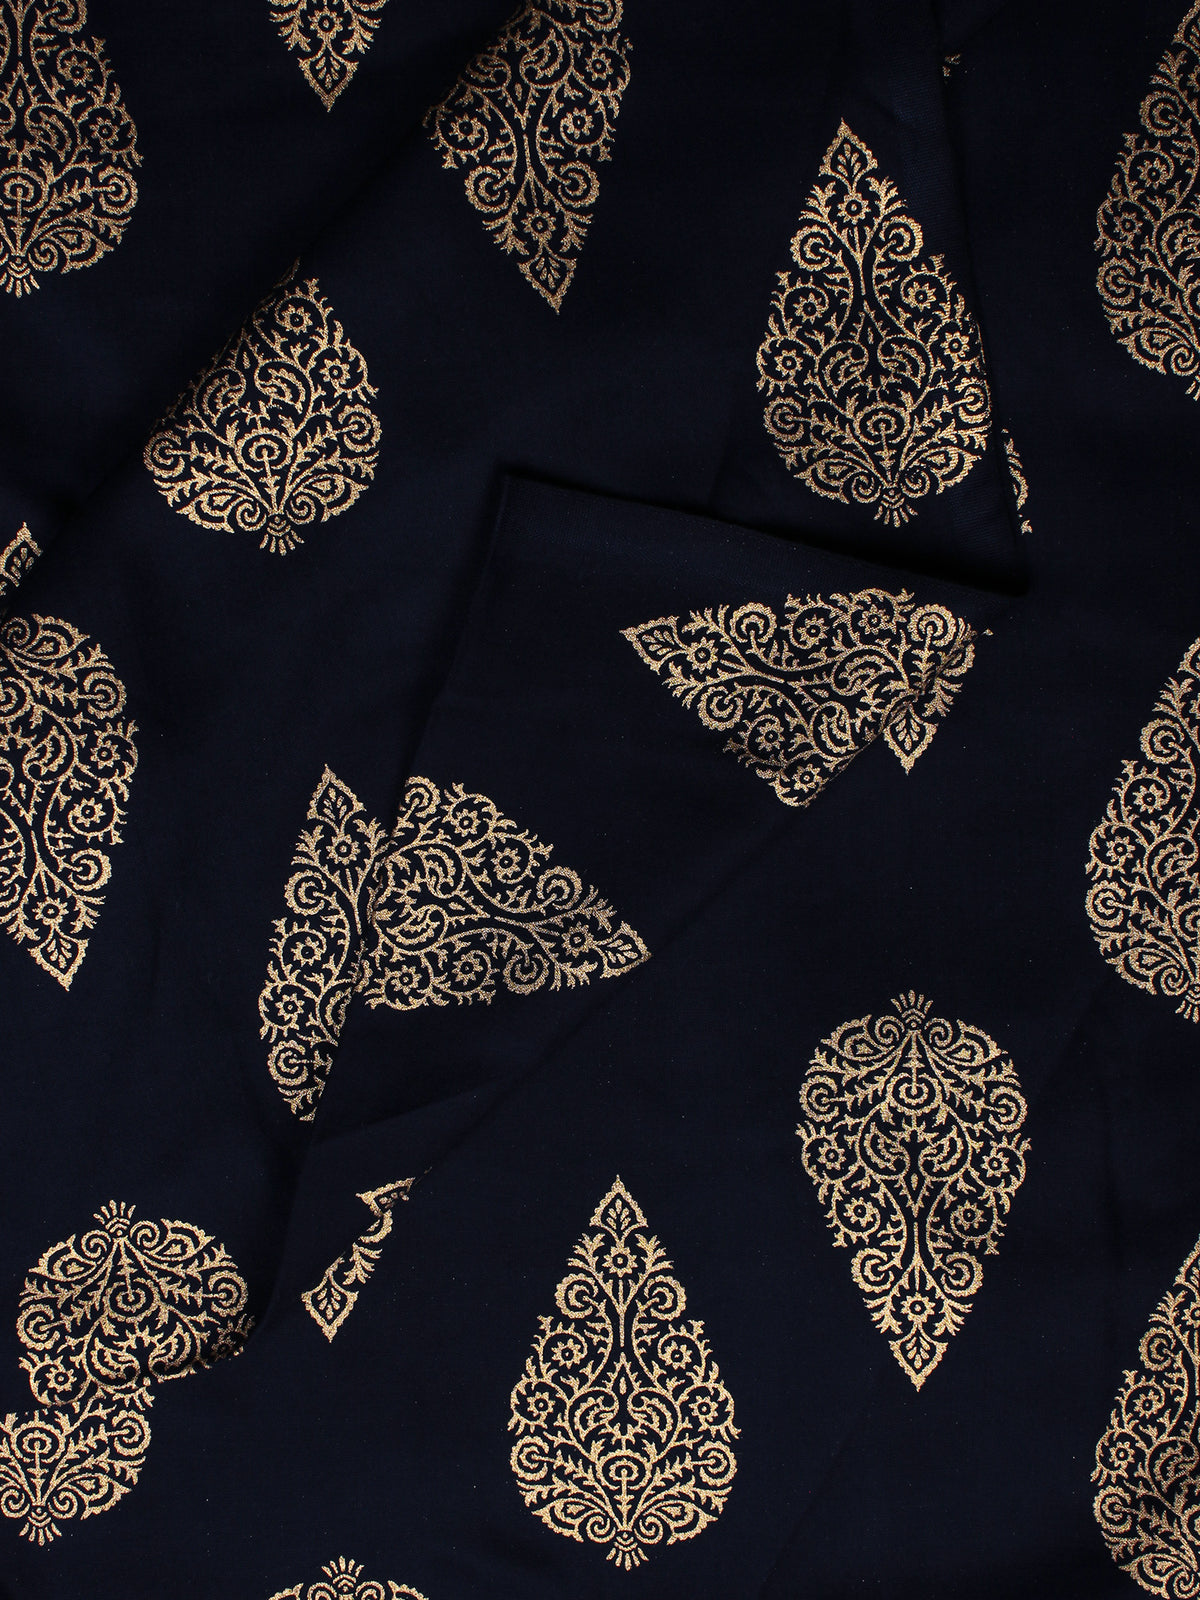 Navy Blue Gold Hand Block Printed Cotton Fabric Per Meter - F001F2001